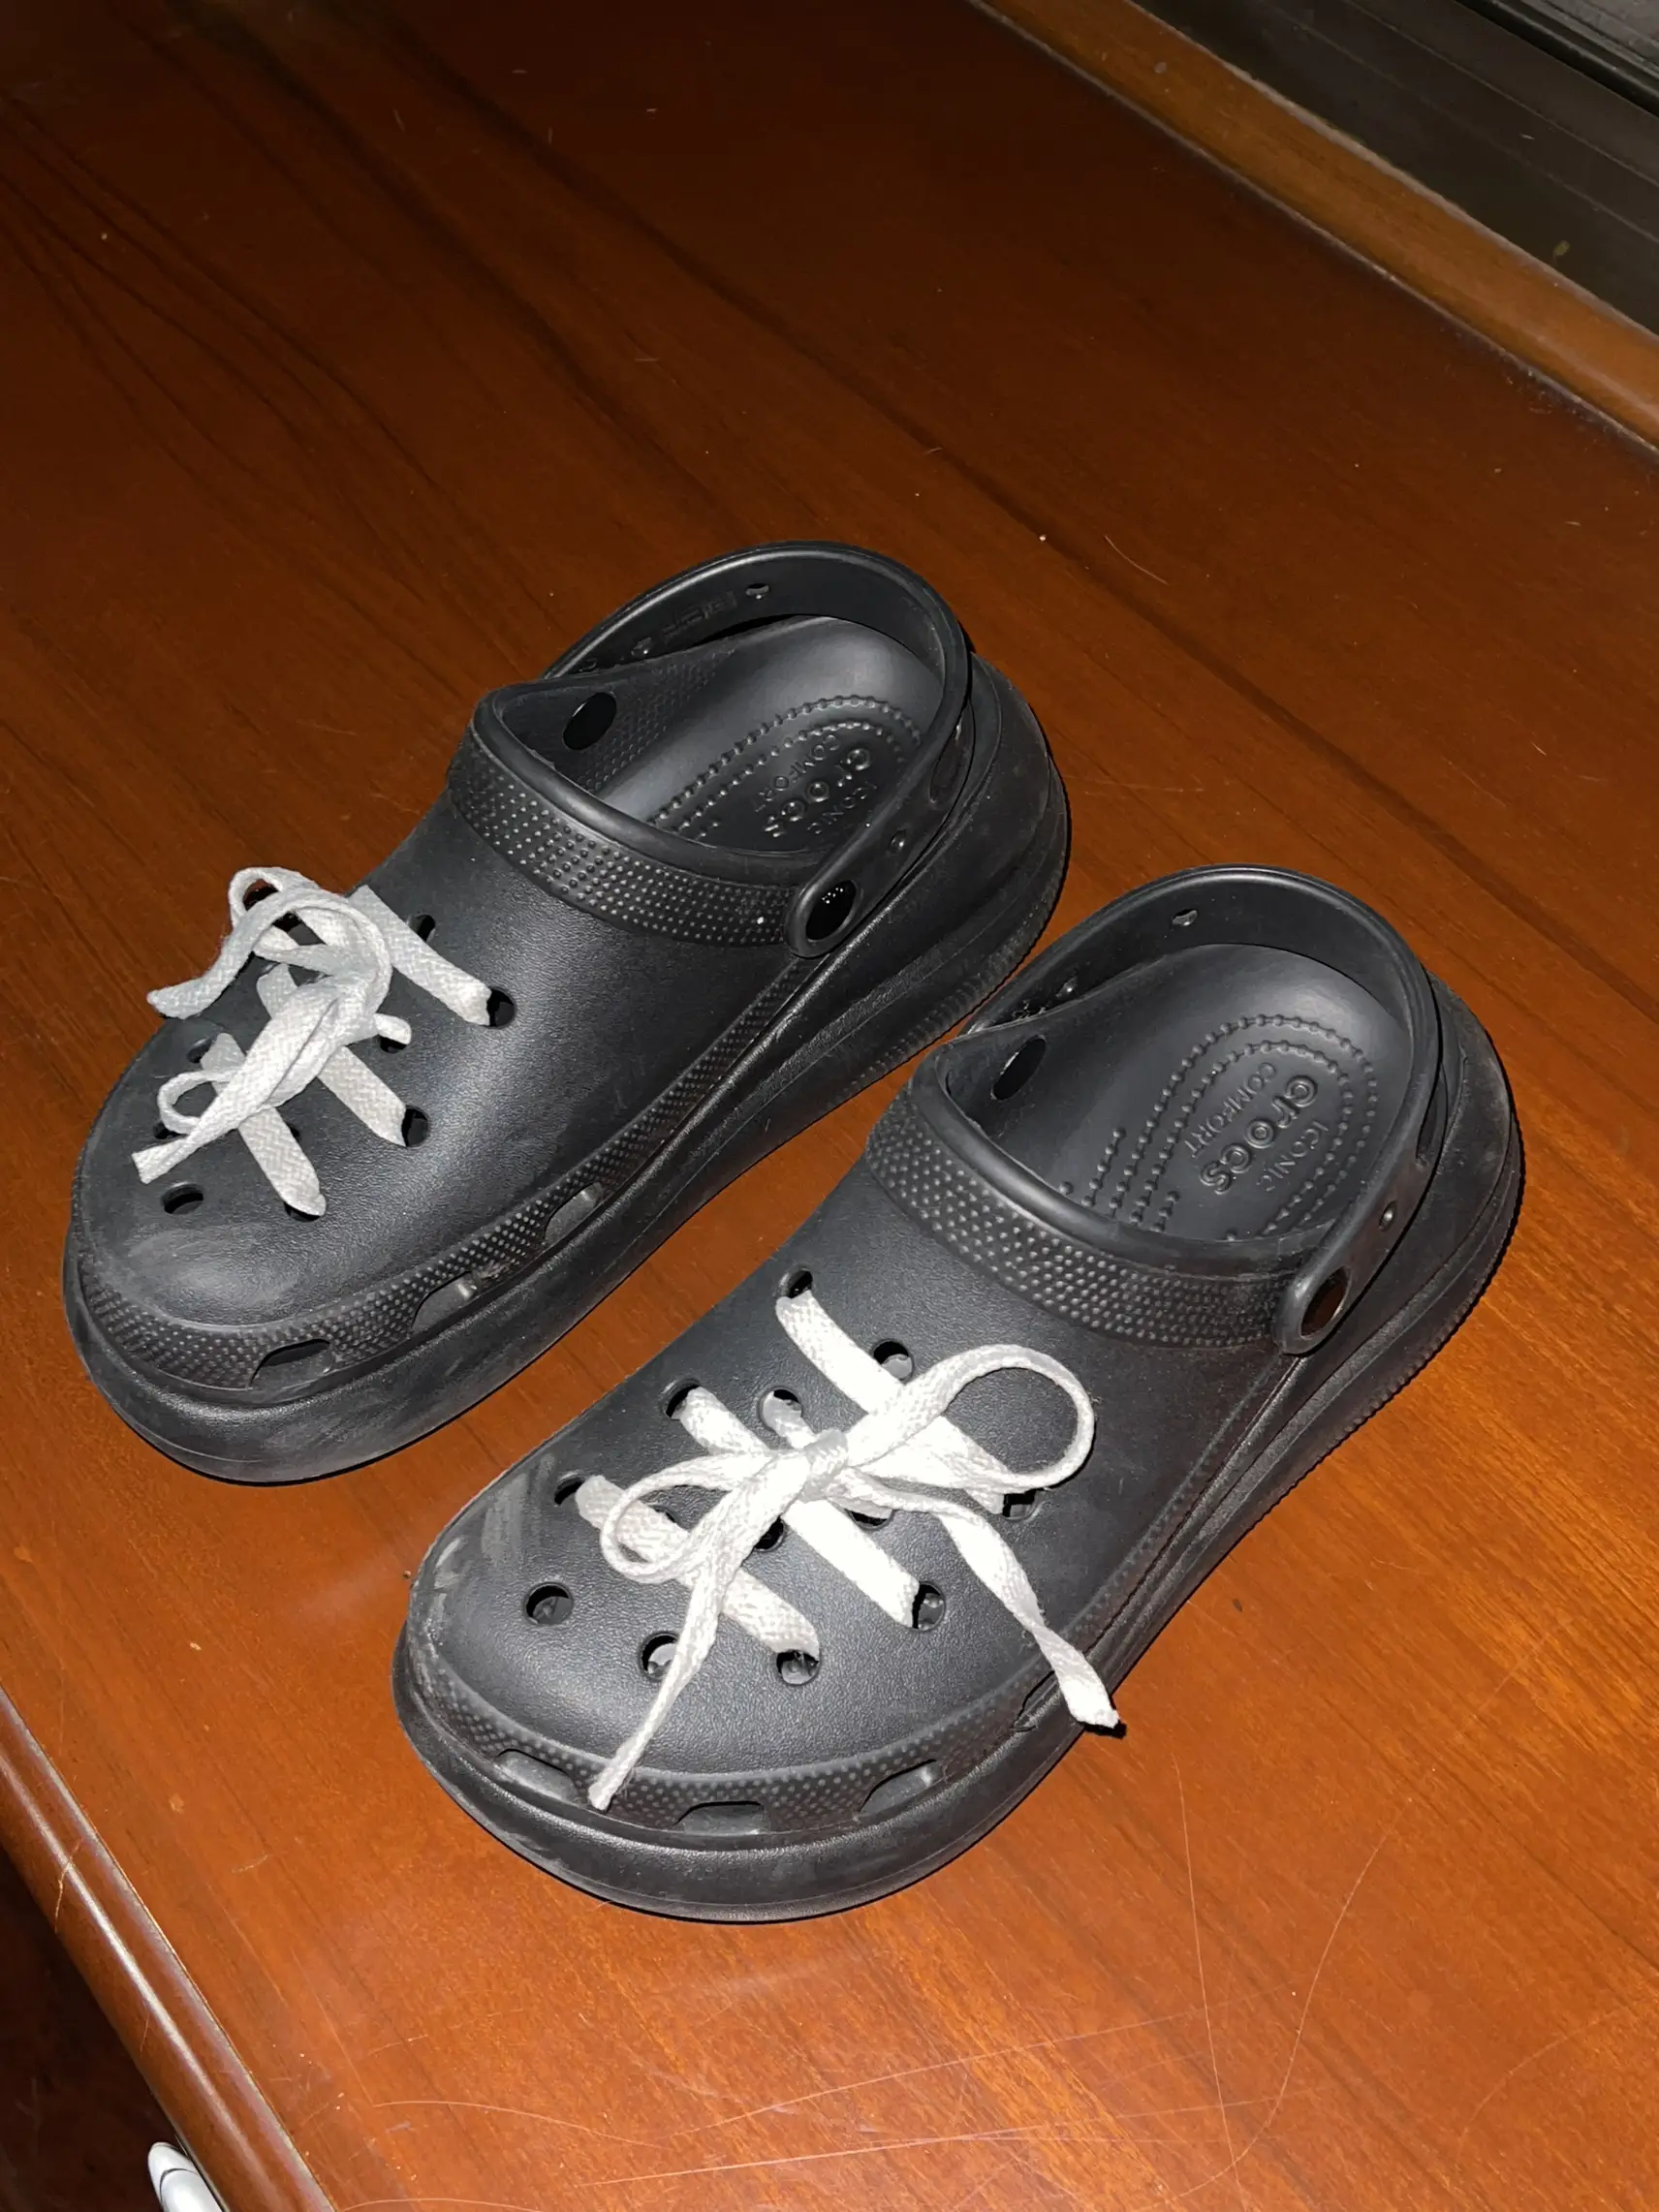 How to properly insert your Crocs Charms/Decor (My Experience) #howto #diy # crocs 